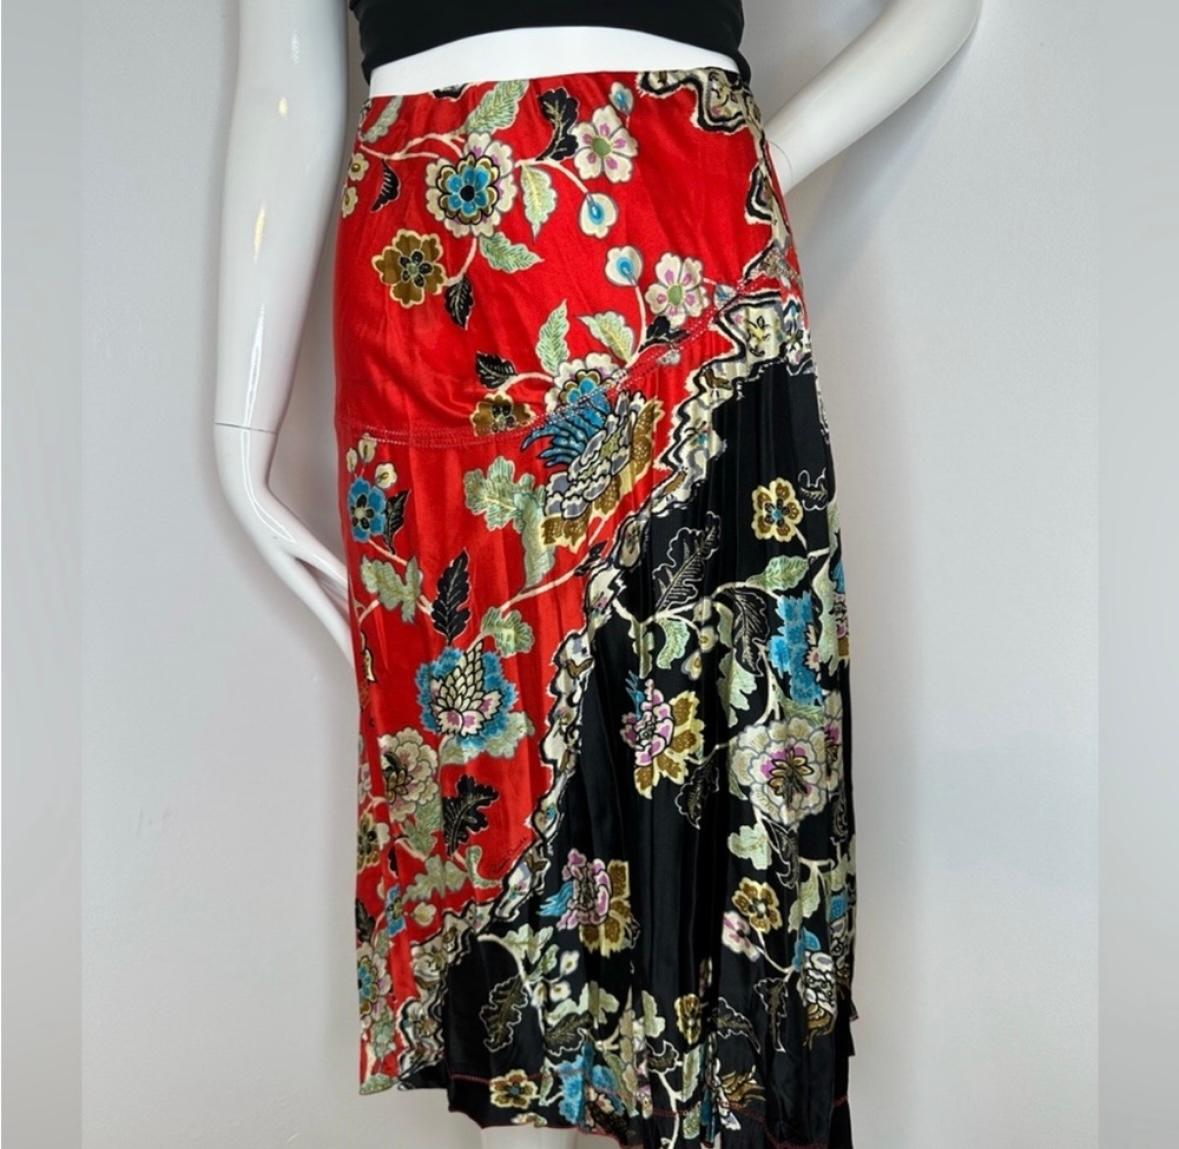 Rare Roberto Cavalli 2003 chinoiserie silk skirt 
Red black and gold motifs 

Size L 
Elastic band
Approx. flat measure mats:
Waist 14. 5 inches 
Length: 26.5 

Great vintage condition.